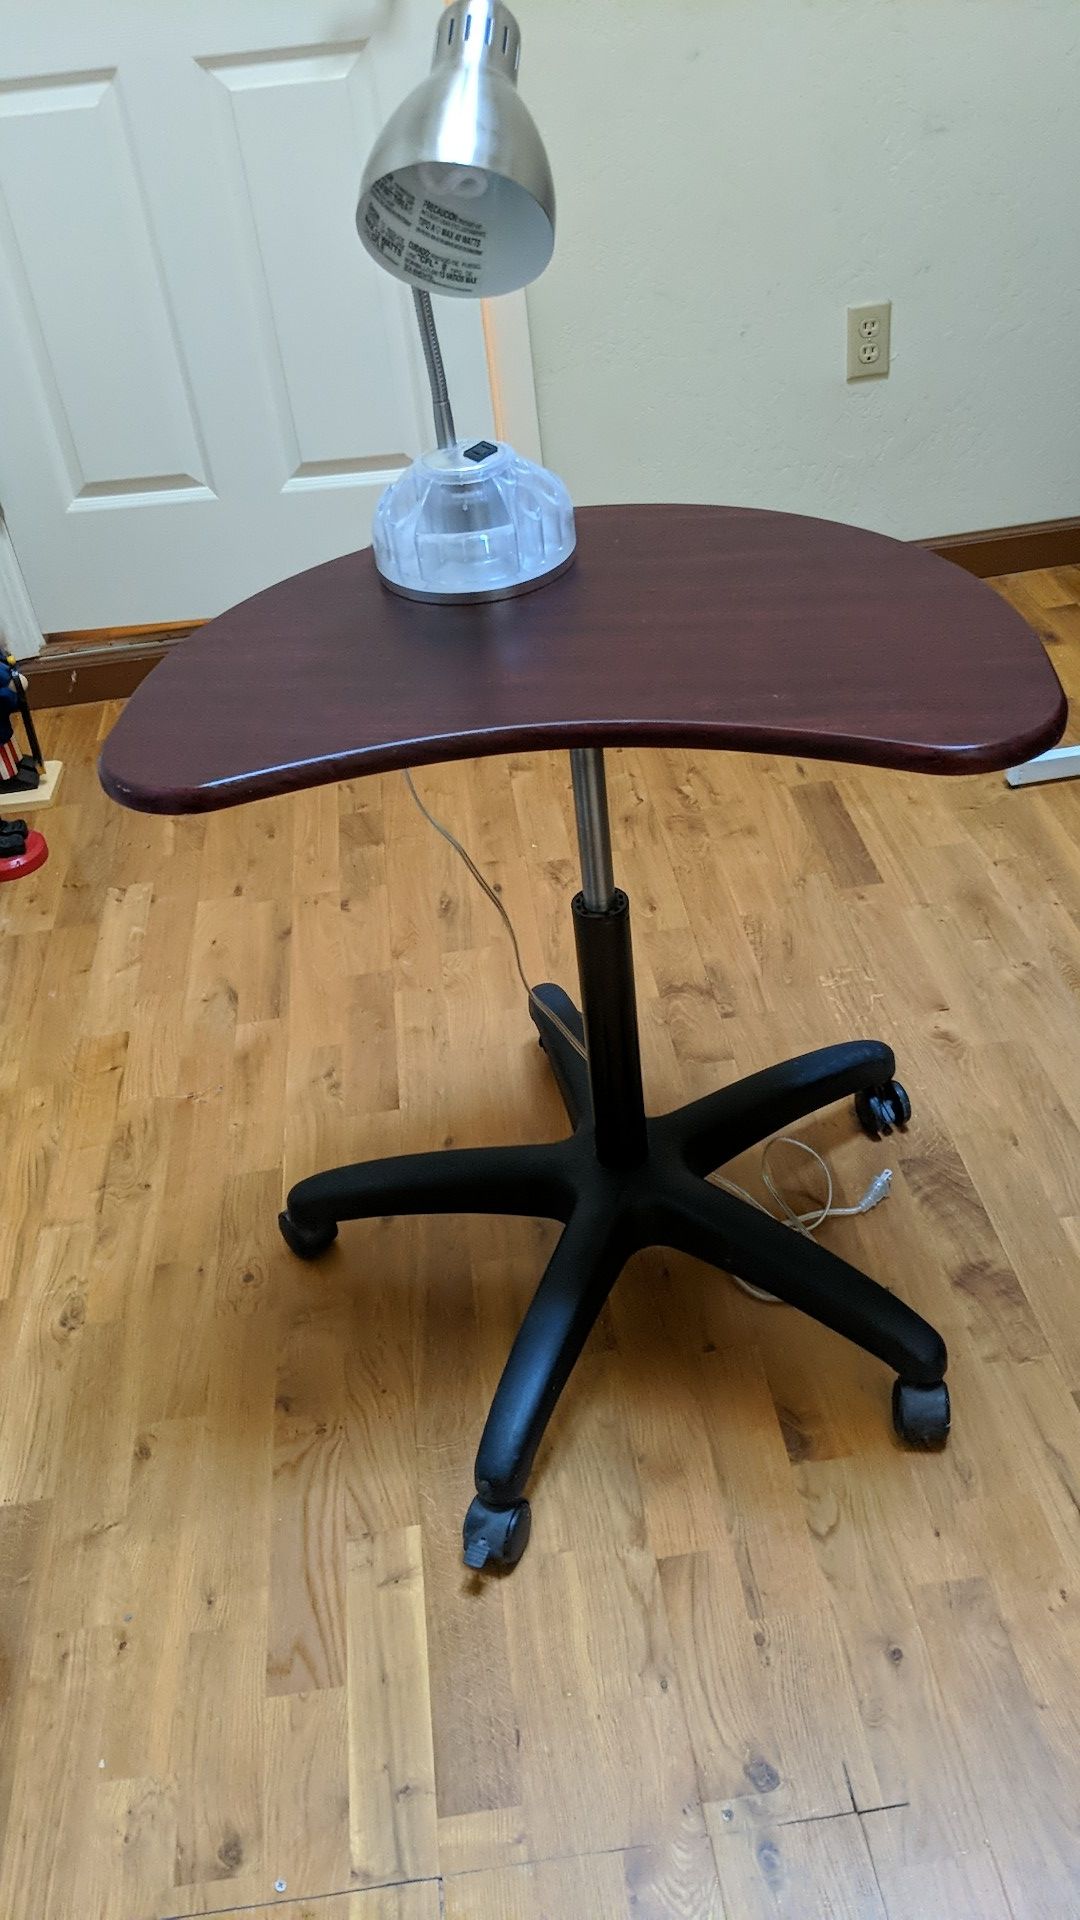 Small desk table. Adjustable in hight.